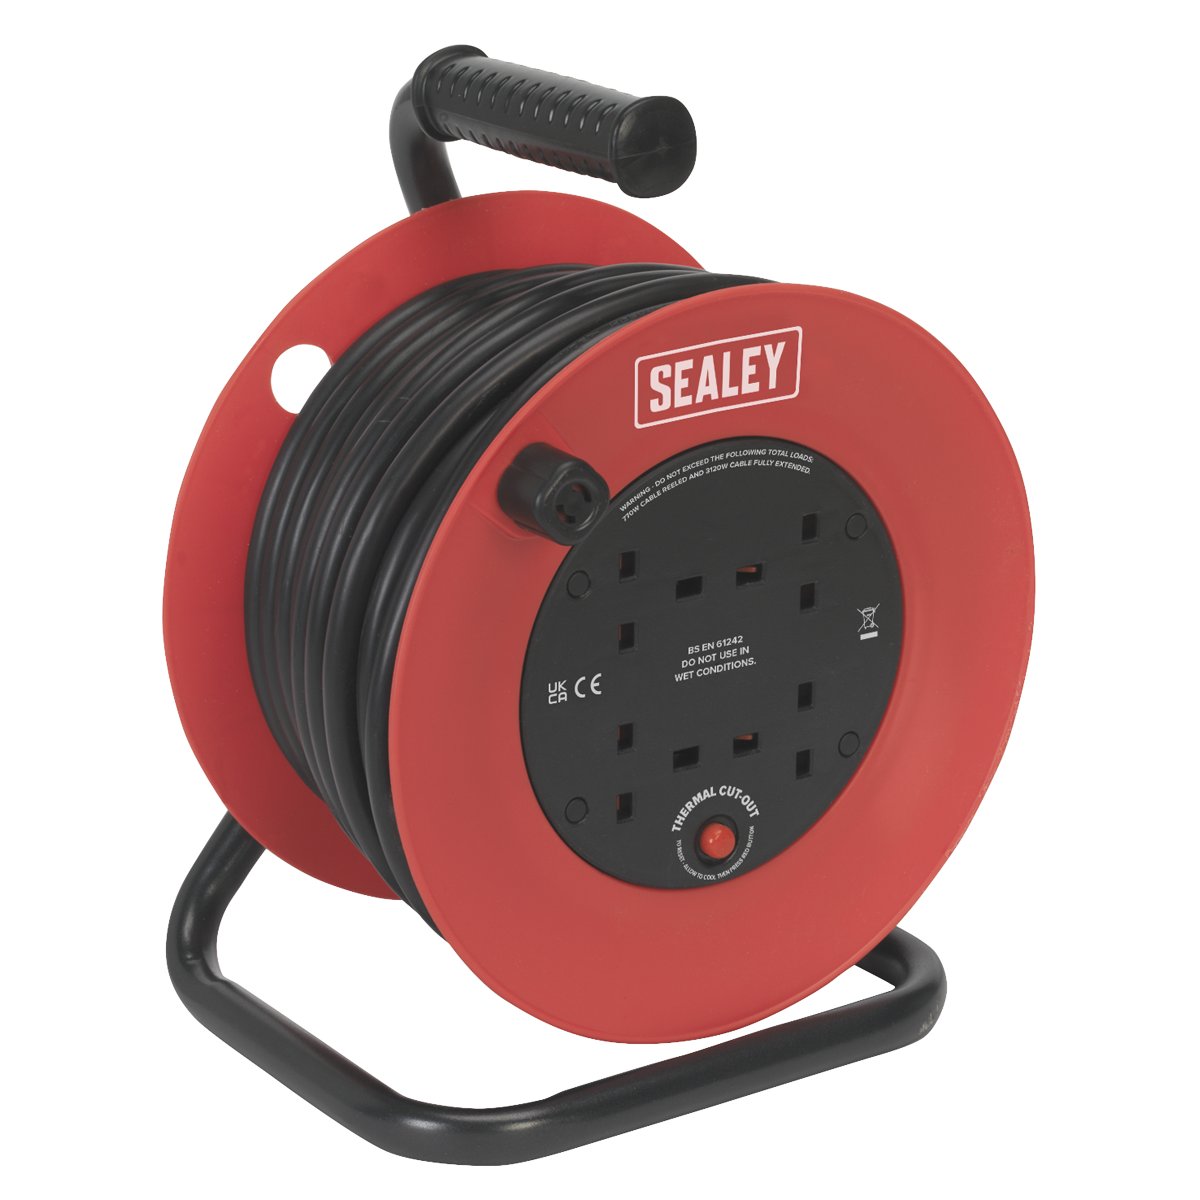 Sealey Cable Reel 25m 4 x 230V 2.5mm² Heavy-Duty Thermal Trip